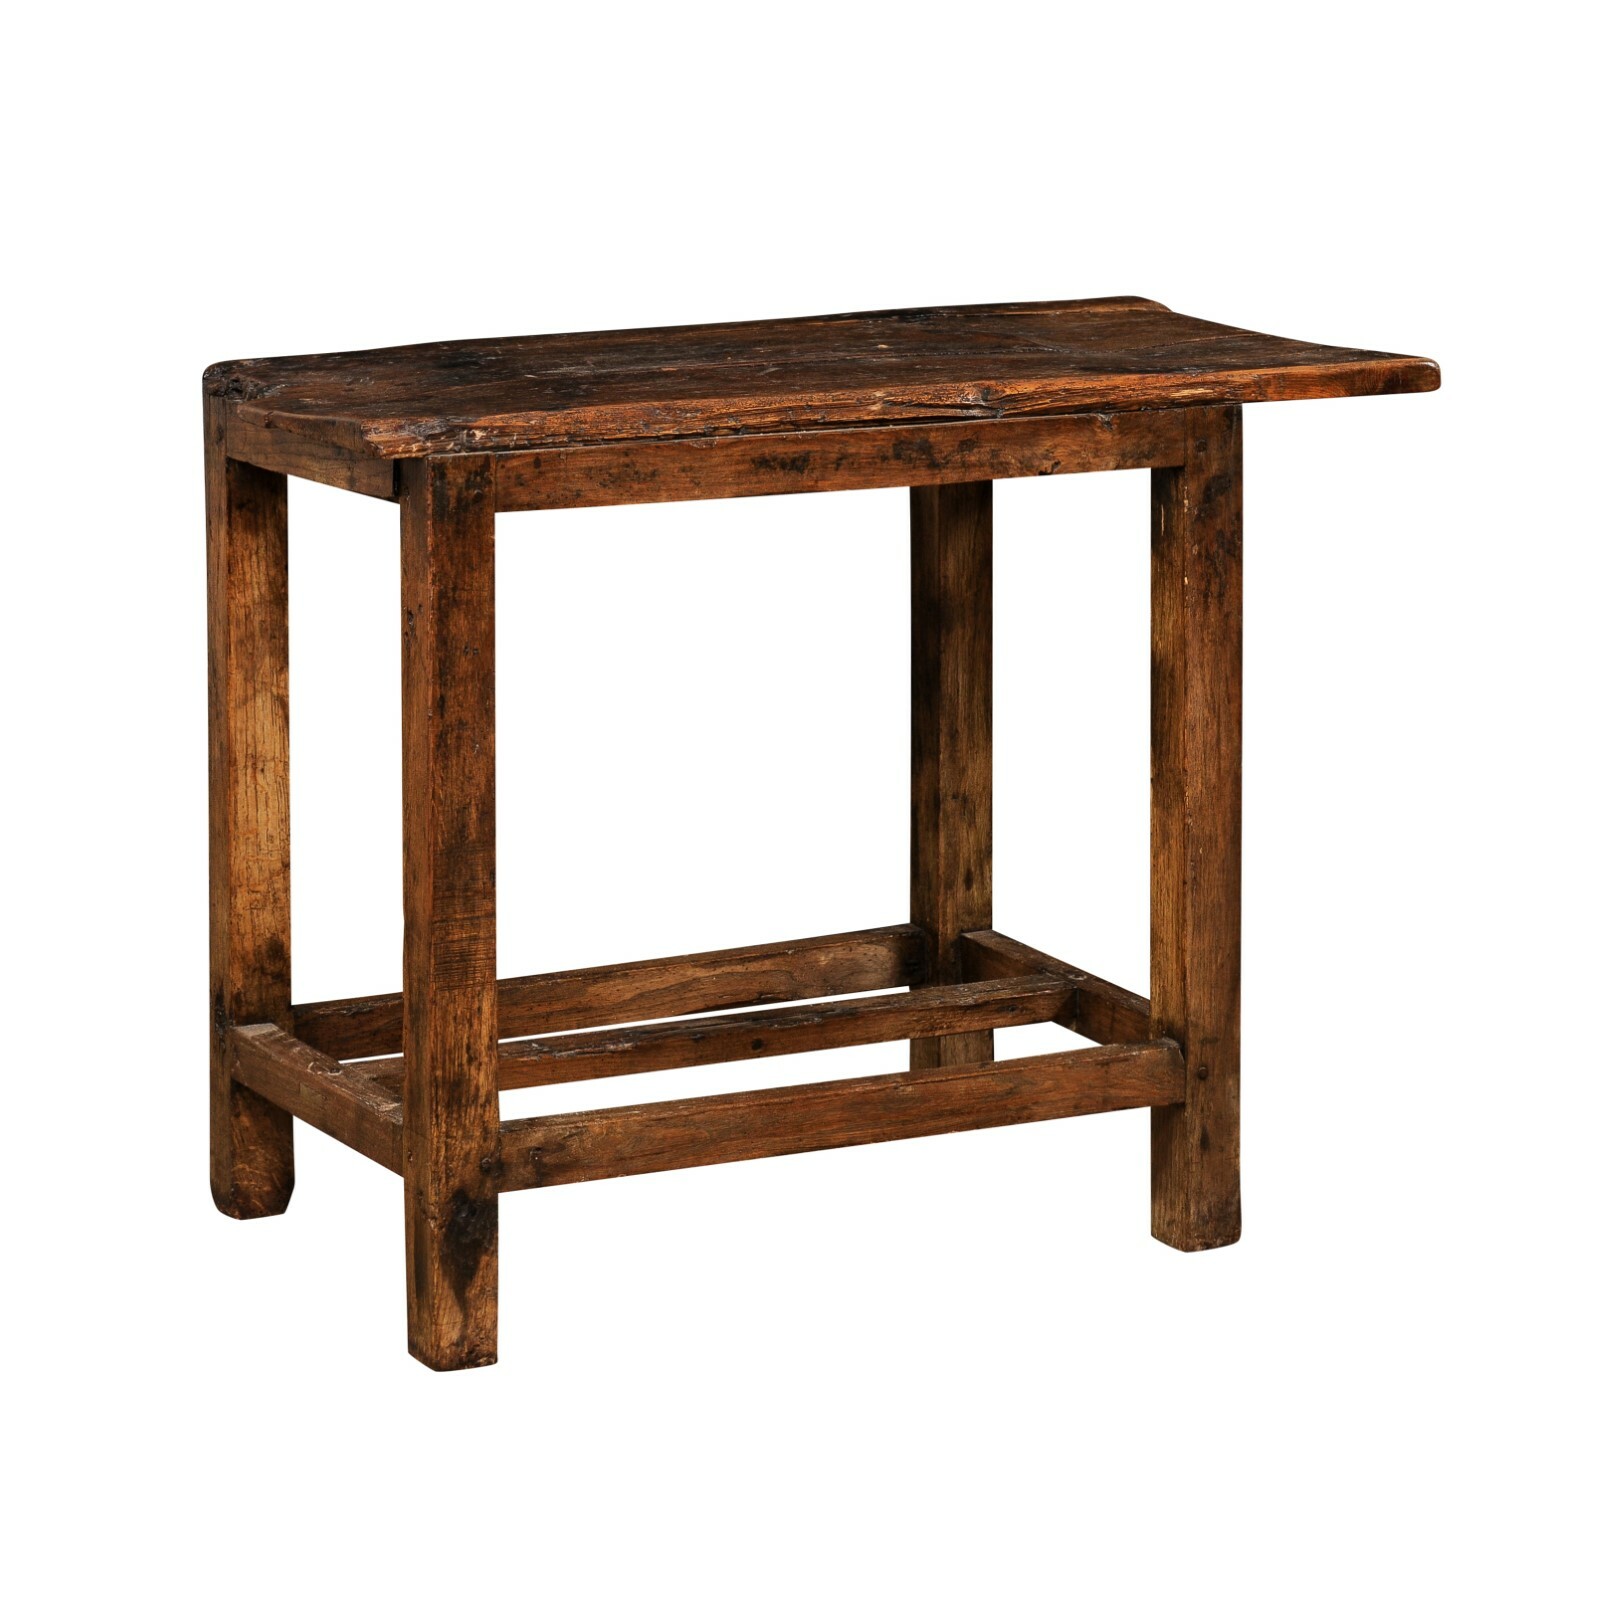 Spanish Rustic Wooden Accent Table